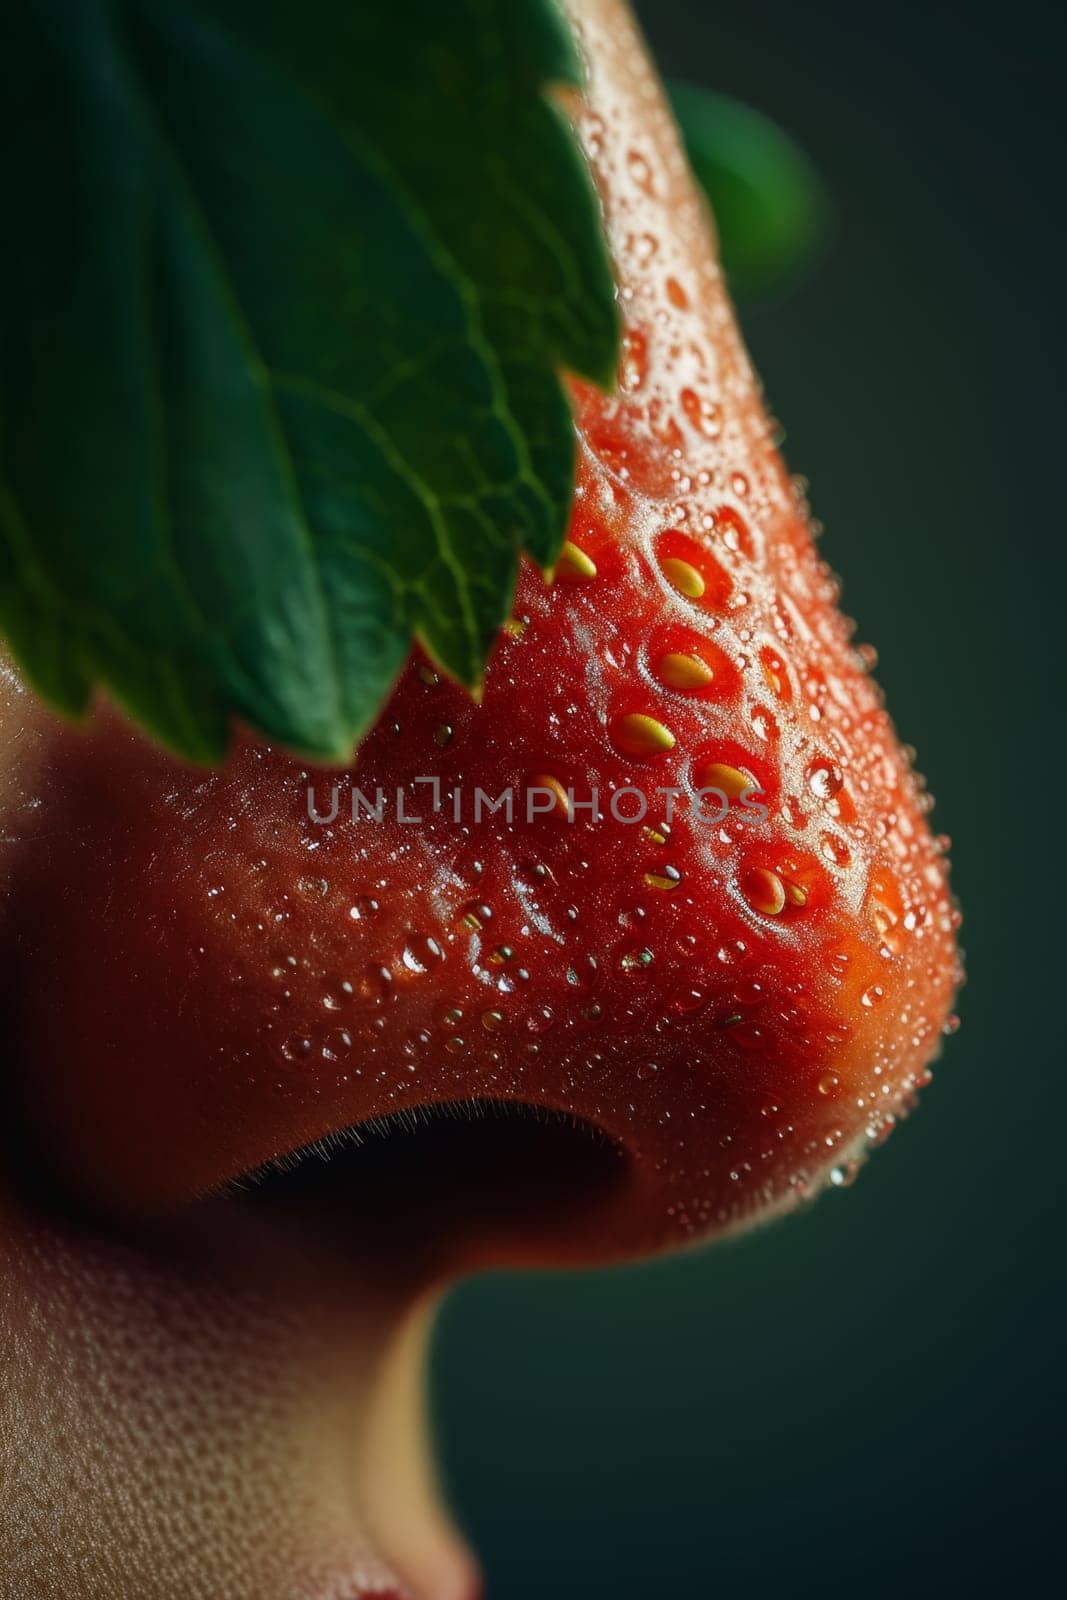 close-up of a nose with large blackheads. Strawberry Nose.